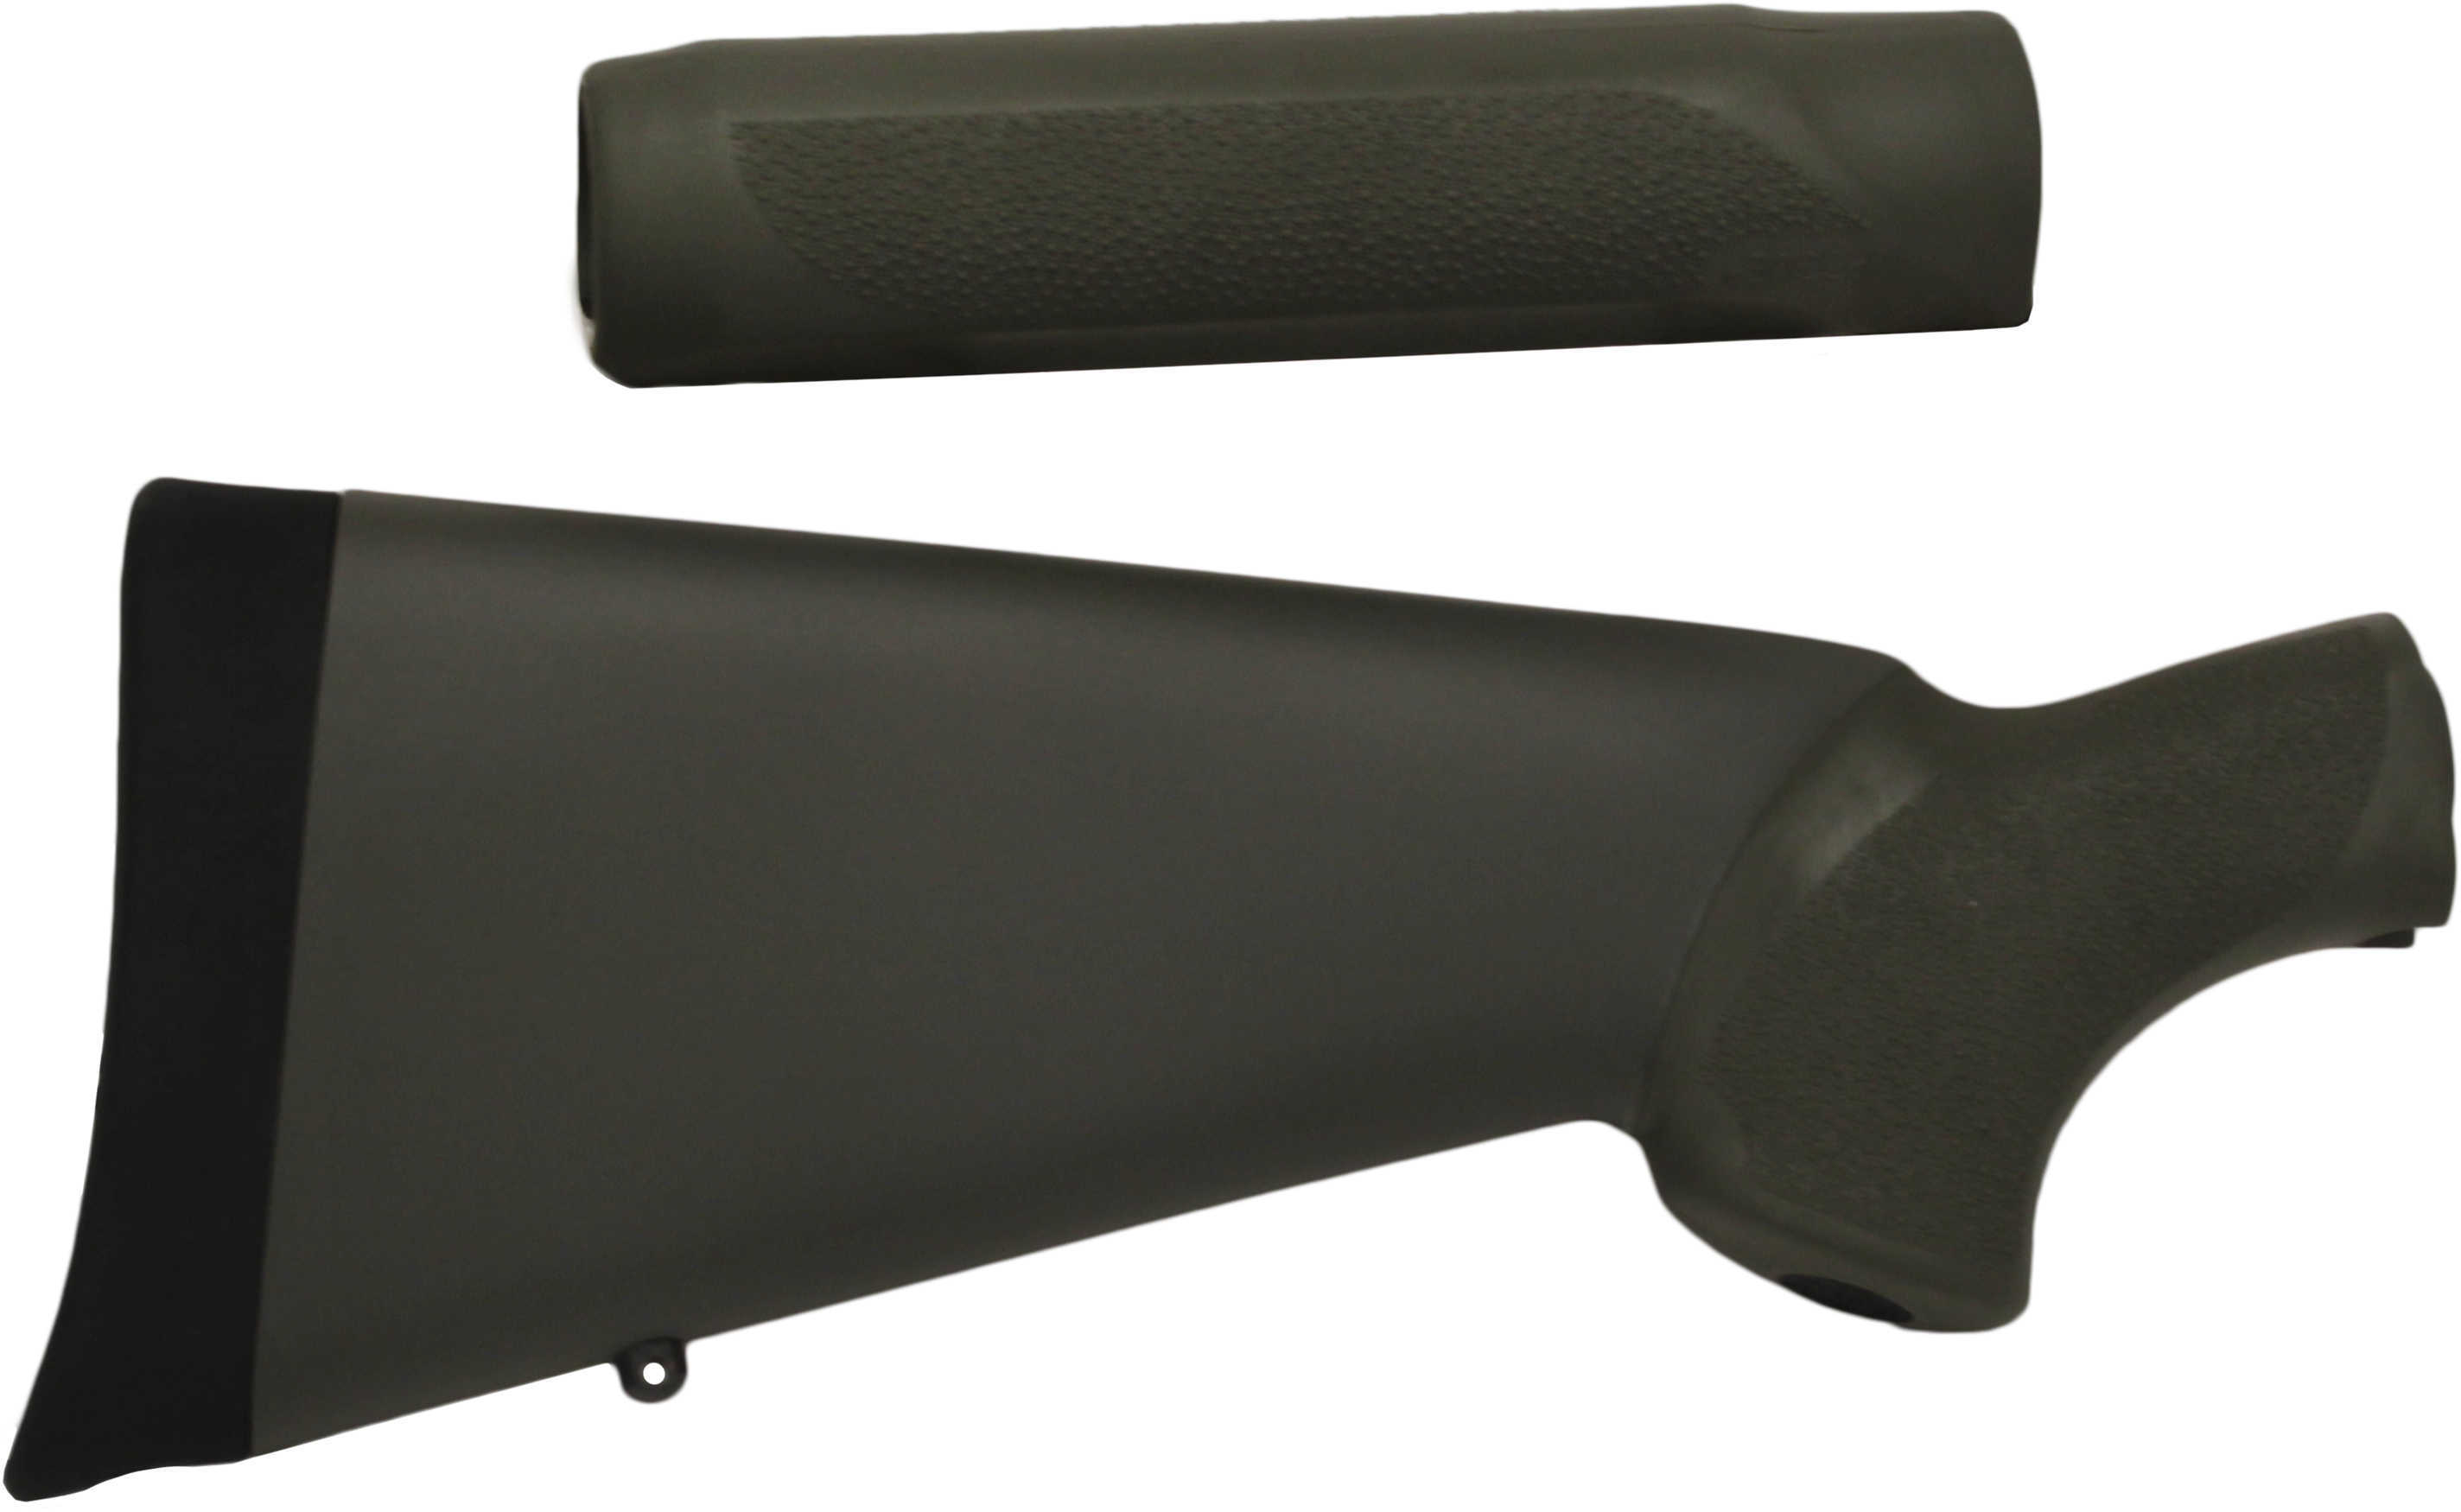 Hogue Mossberg 500 Overmolded Stock Kit Olive Drab Green 05212